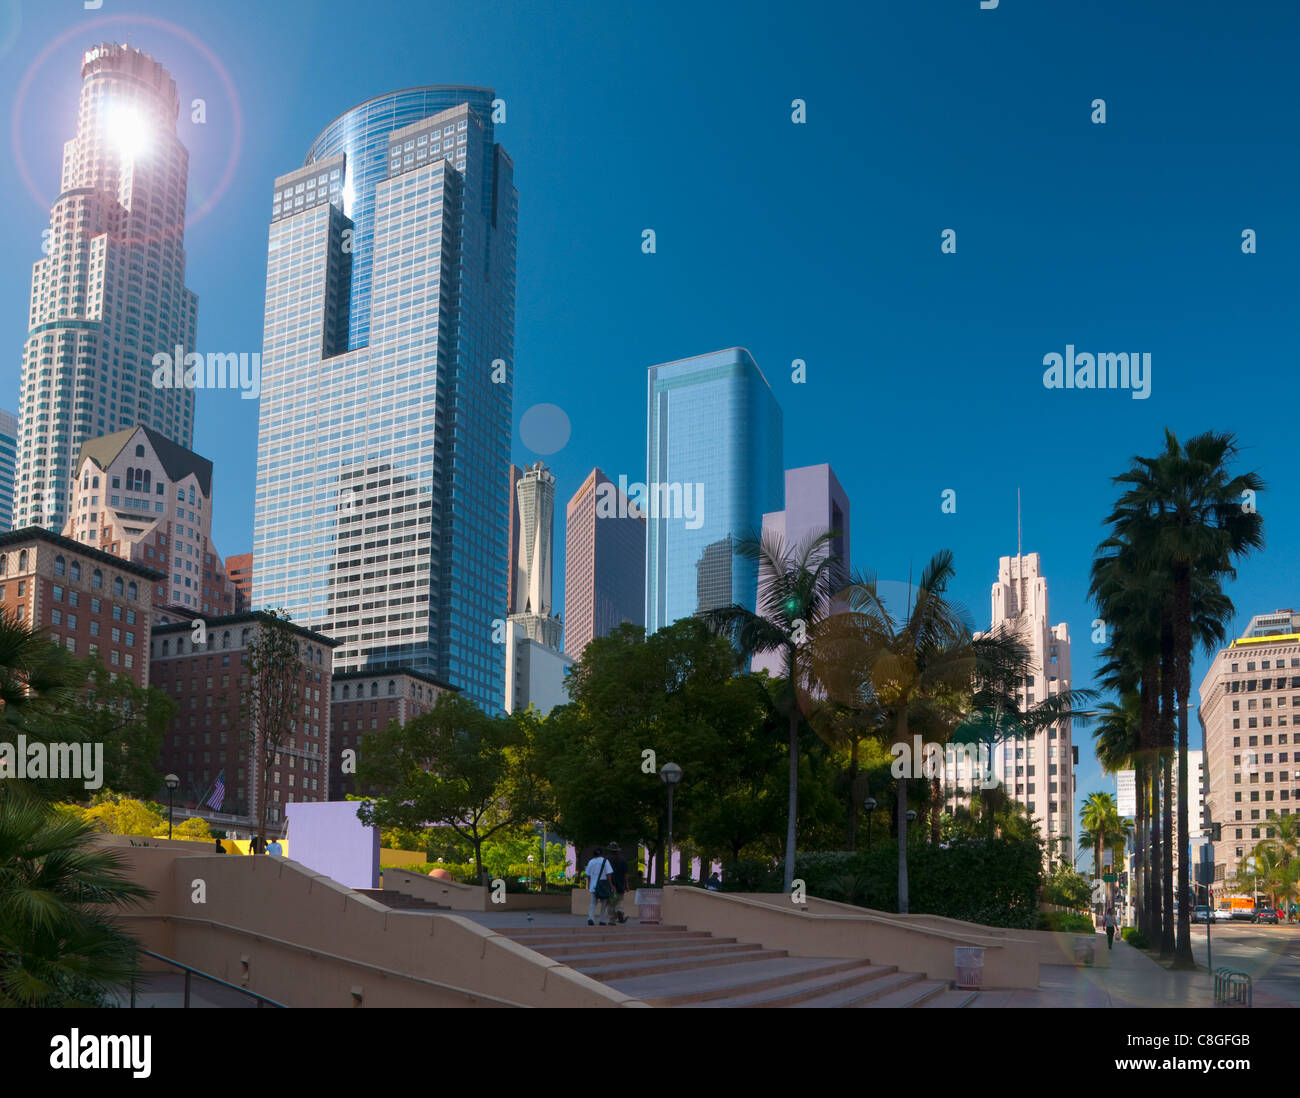 Downtown, Los Angeles, California, United States of America Stock Photo